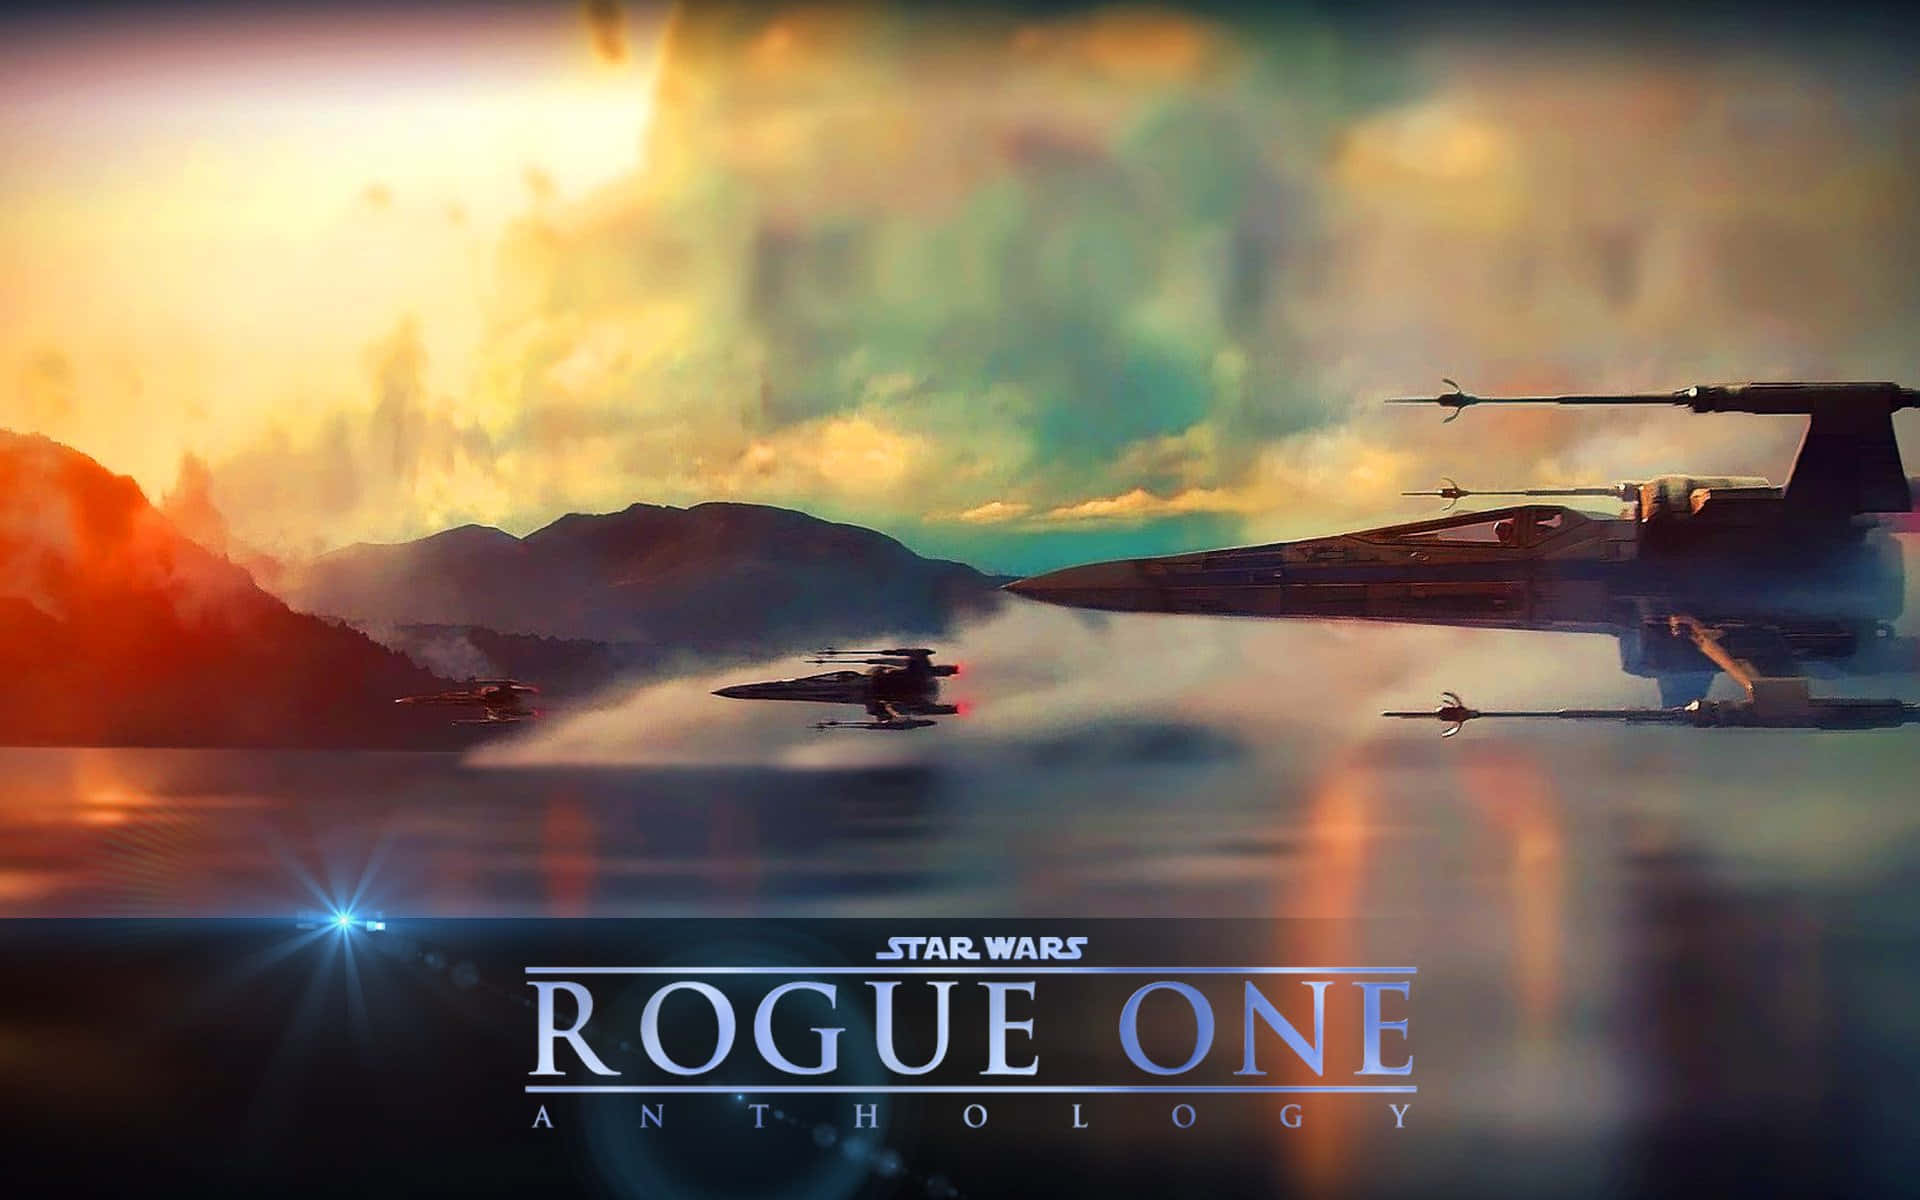 An Epic Space Battle Awakens in Star Wars Rogue One Wallpaper